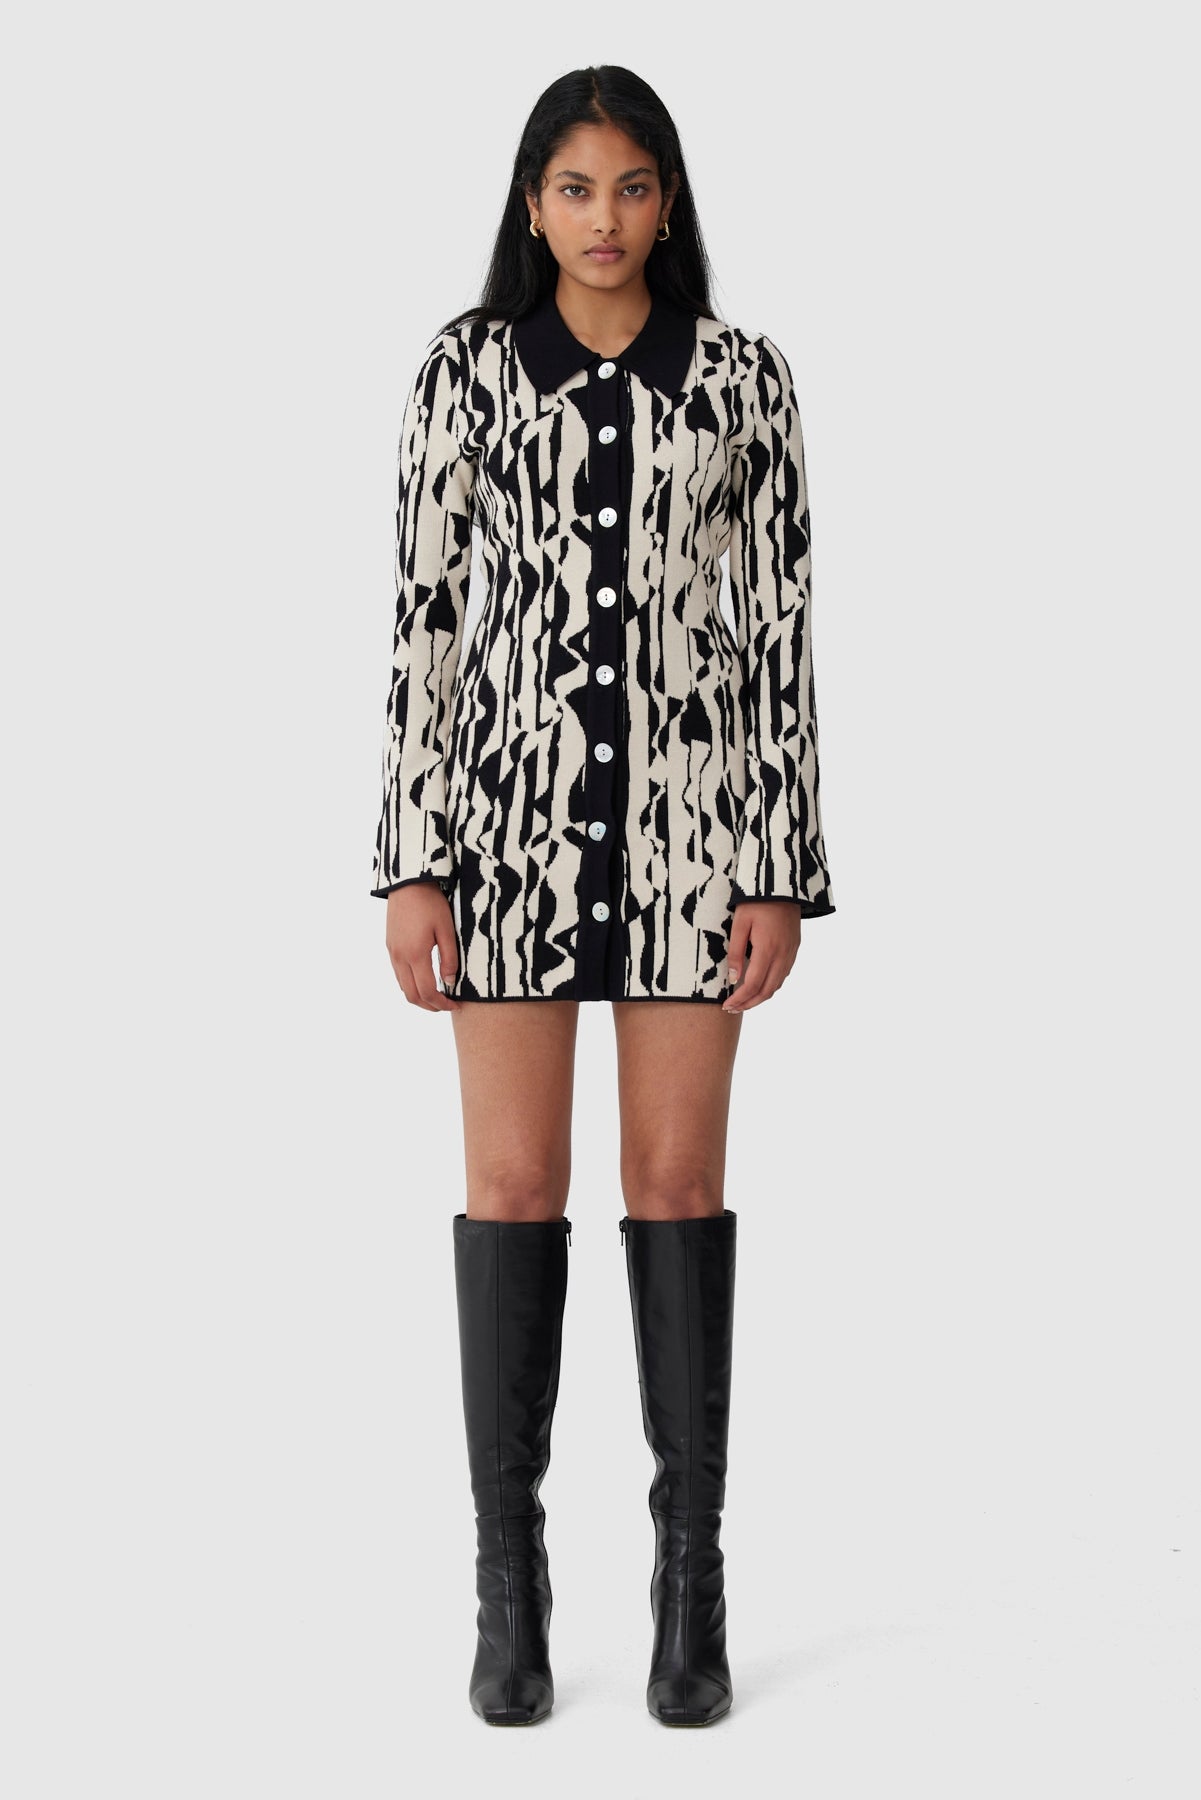 C/MEO Collective - Nothing Less Ls Knit Dress - Shapes Print